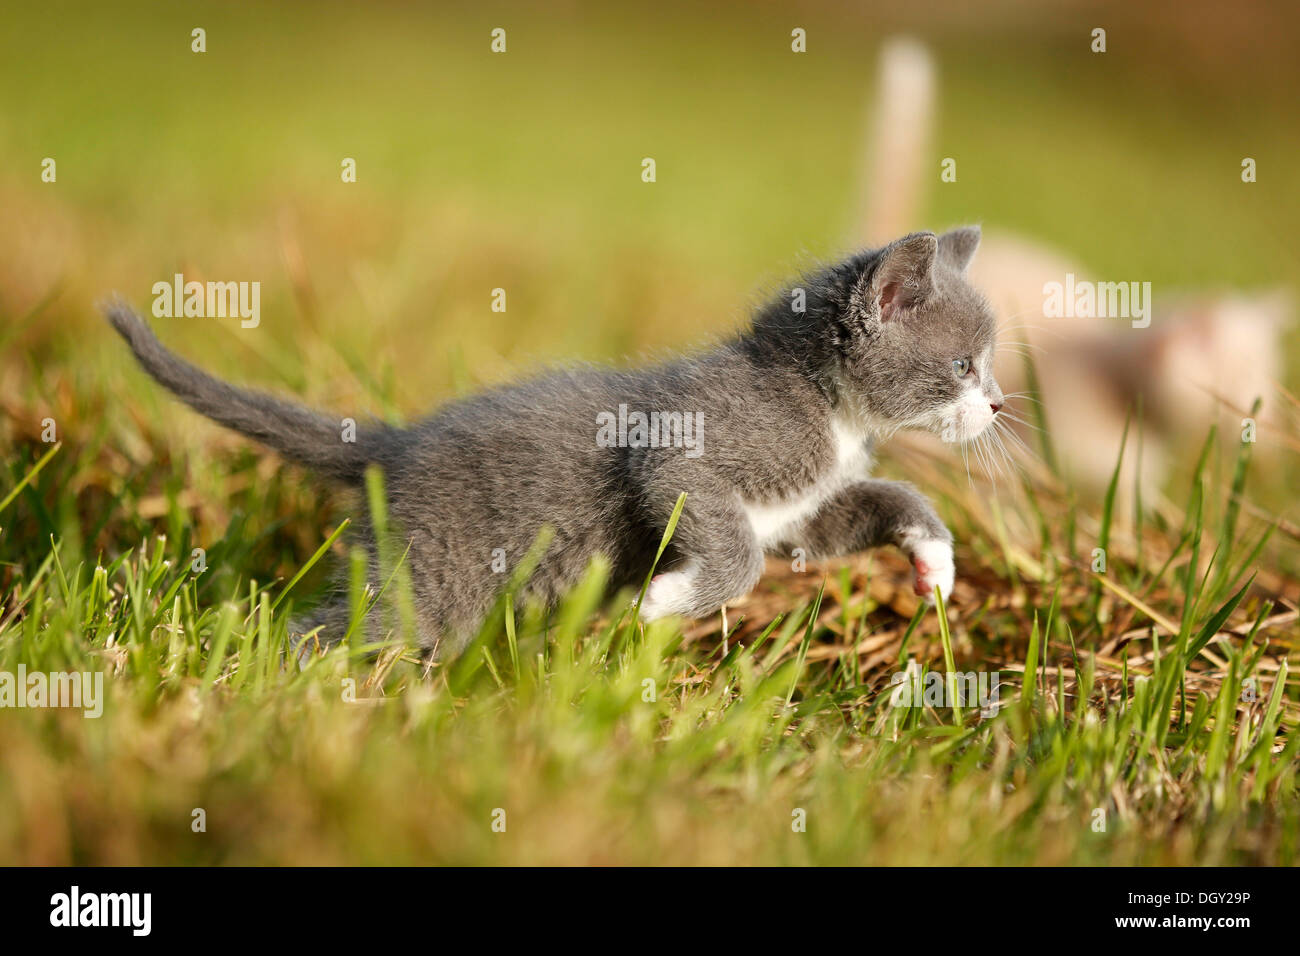 Domestic cat, kitten, 6 weeks, gray, running over a meadow Stock Photo